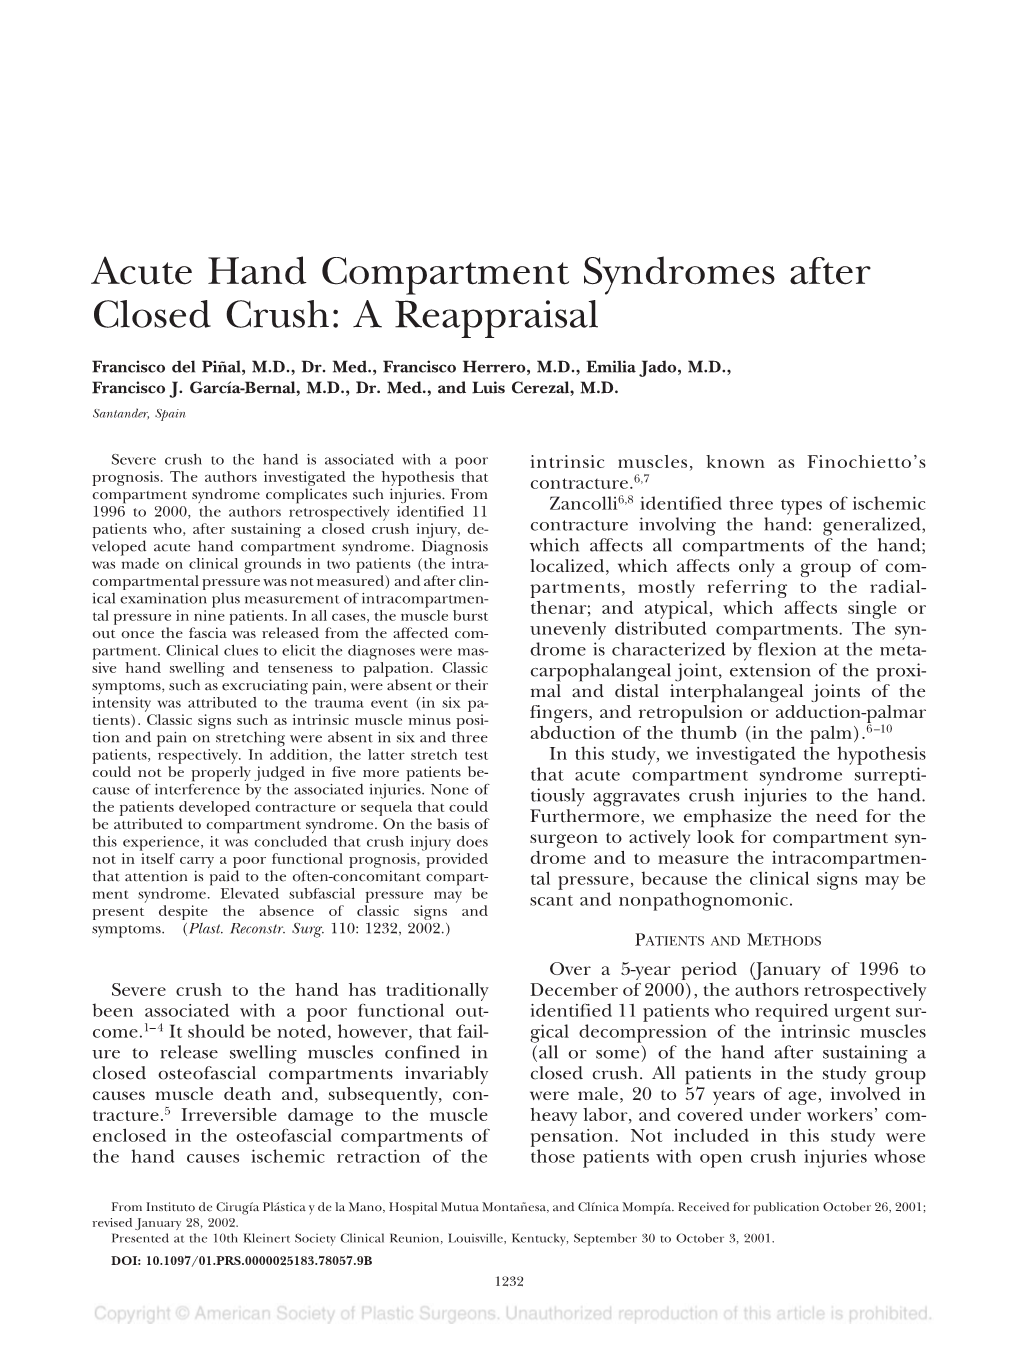 Acute Hand Compartment Syndromes After Closed Crush: a Reappraisal